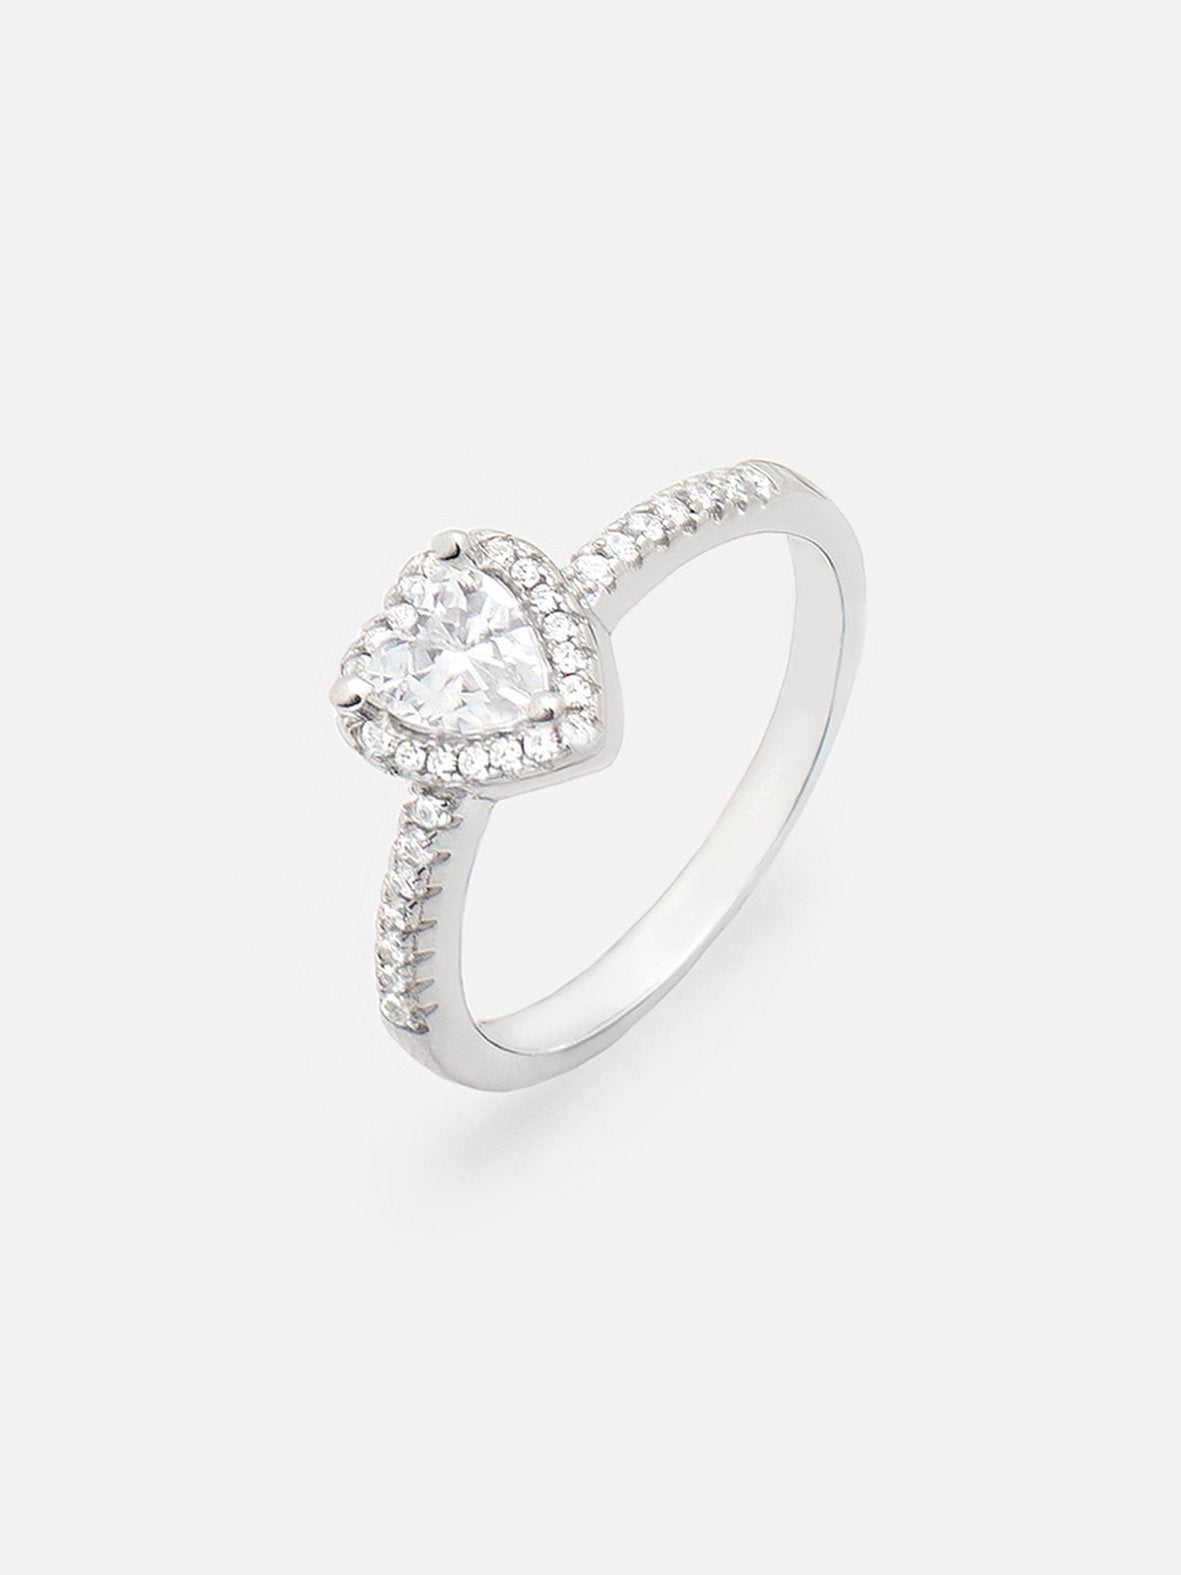 Silver Heart Ring - Promise Ring (18ct White Gold Plated 925 Sterling Silver) - Muchv Jewellery